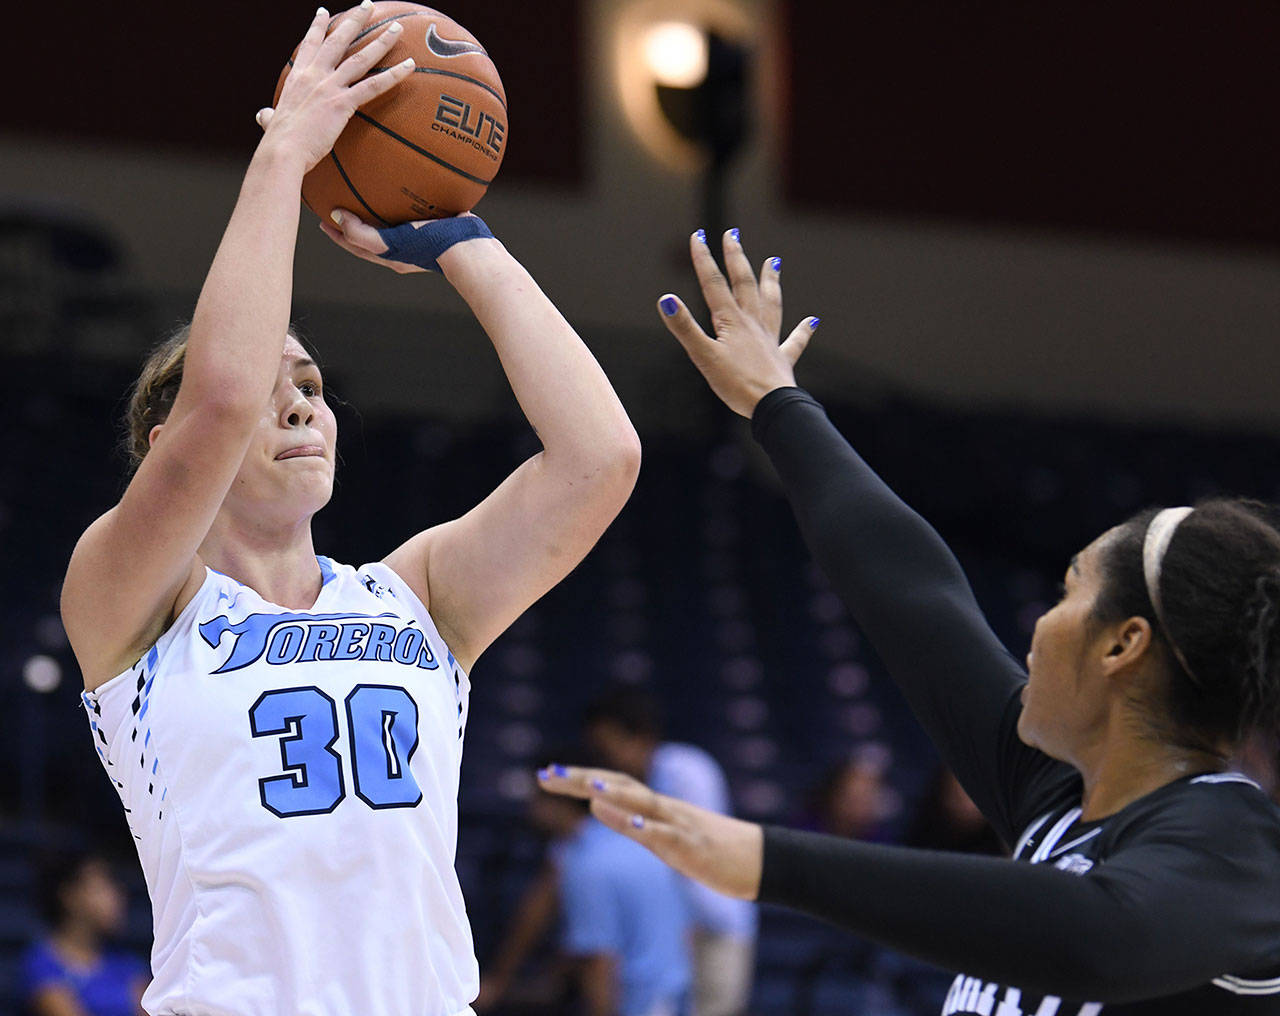 Kendall Bird puts up a shot for the University of San Diego during her freshman season. The White River graduate has played little the past two years while battling injuries. Photo courtesy University of San Diego Athletics